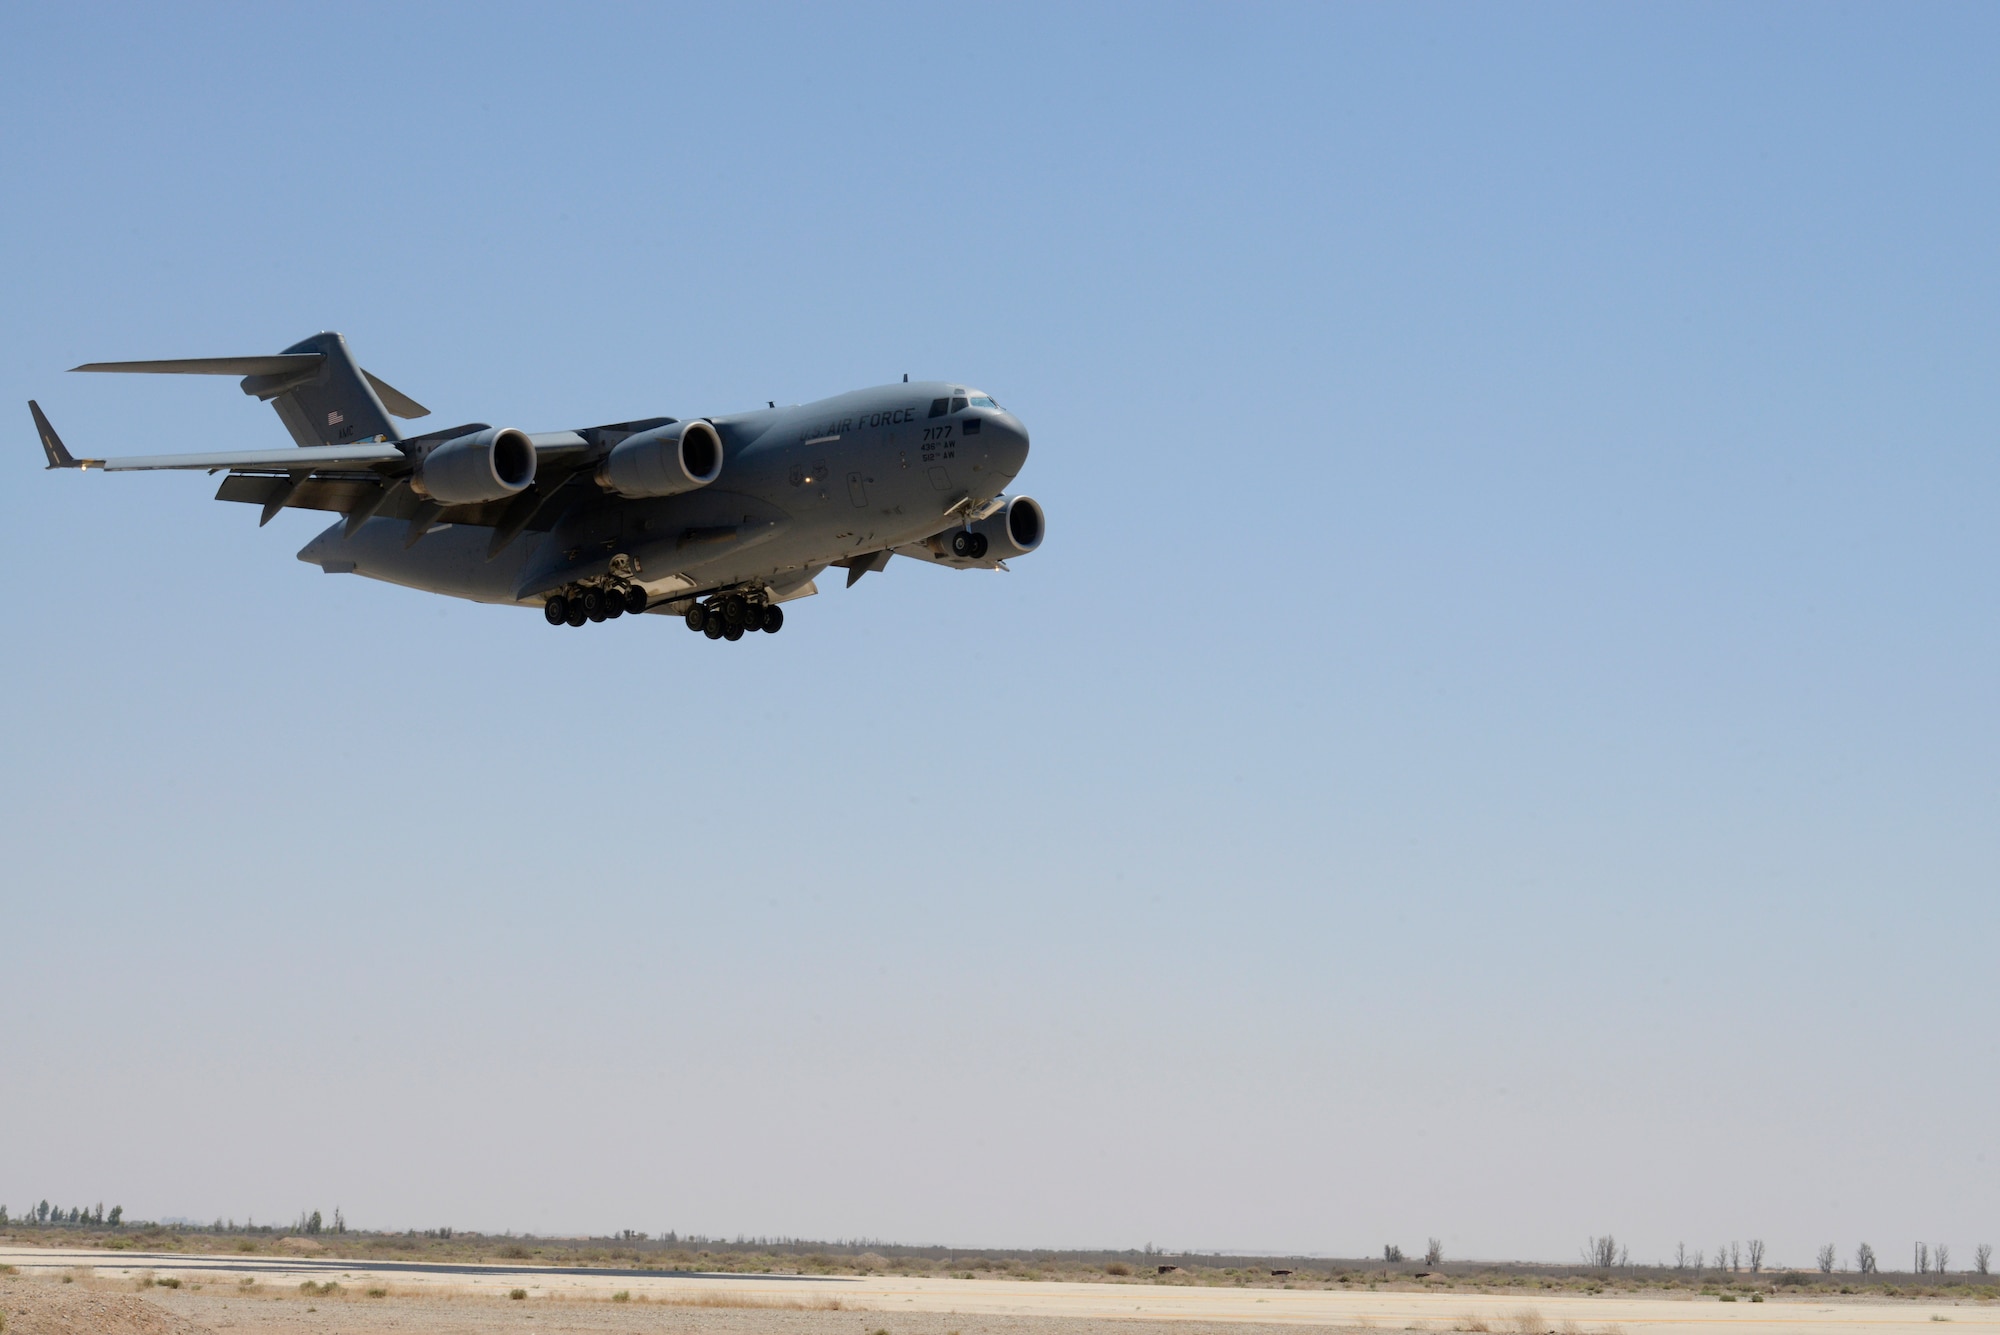 C-17 arriving in Southwest Asia